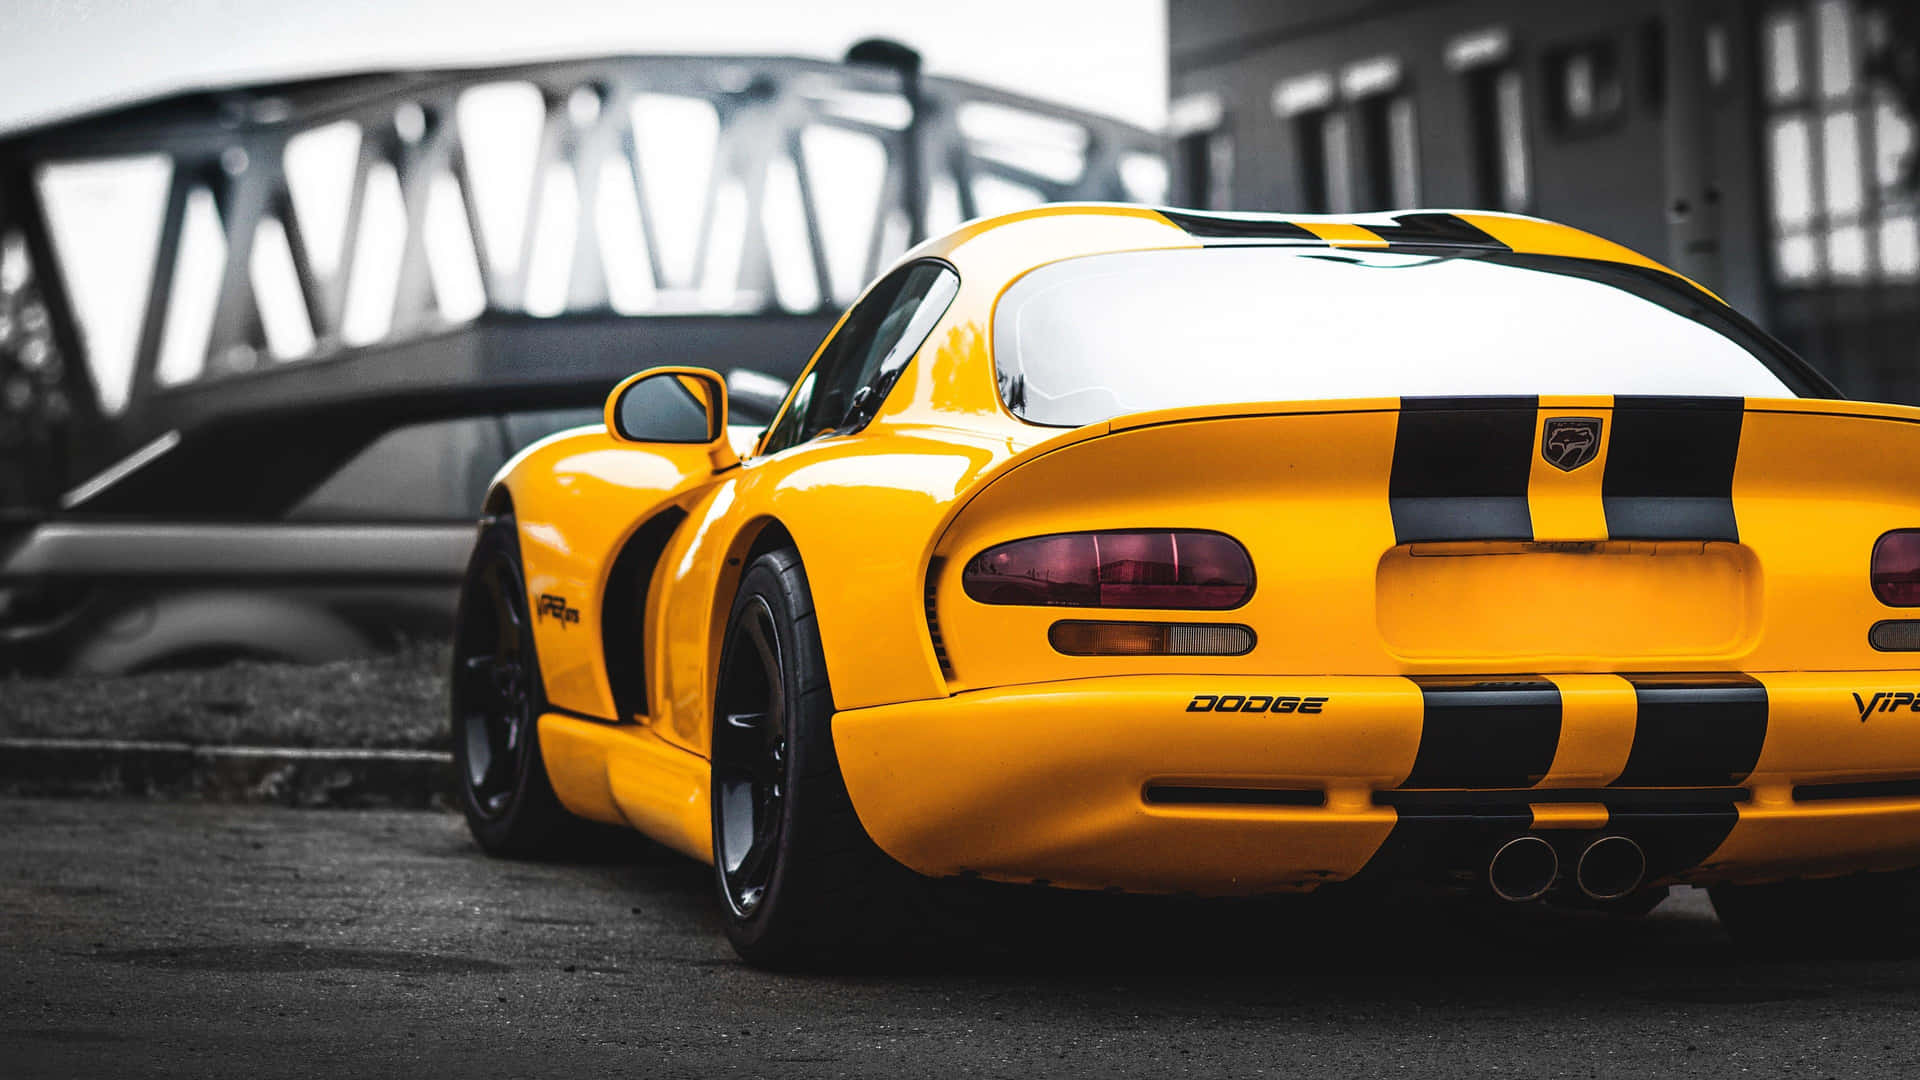 Shimmering in the Sunlight, the Powerful Dodge Viper Wallpaper